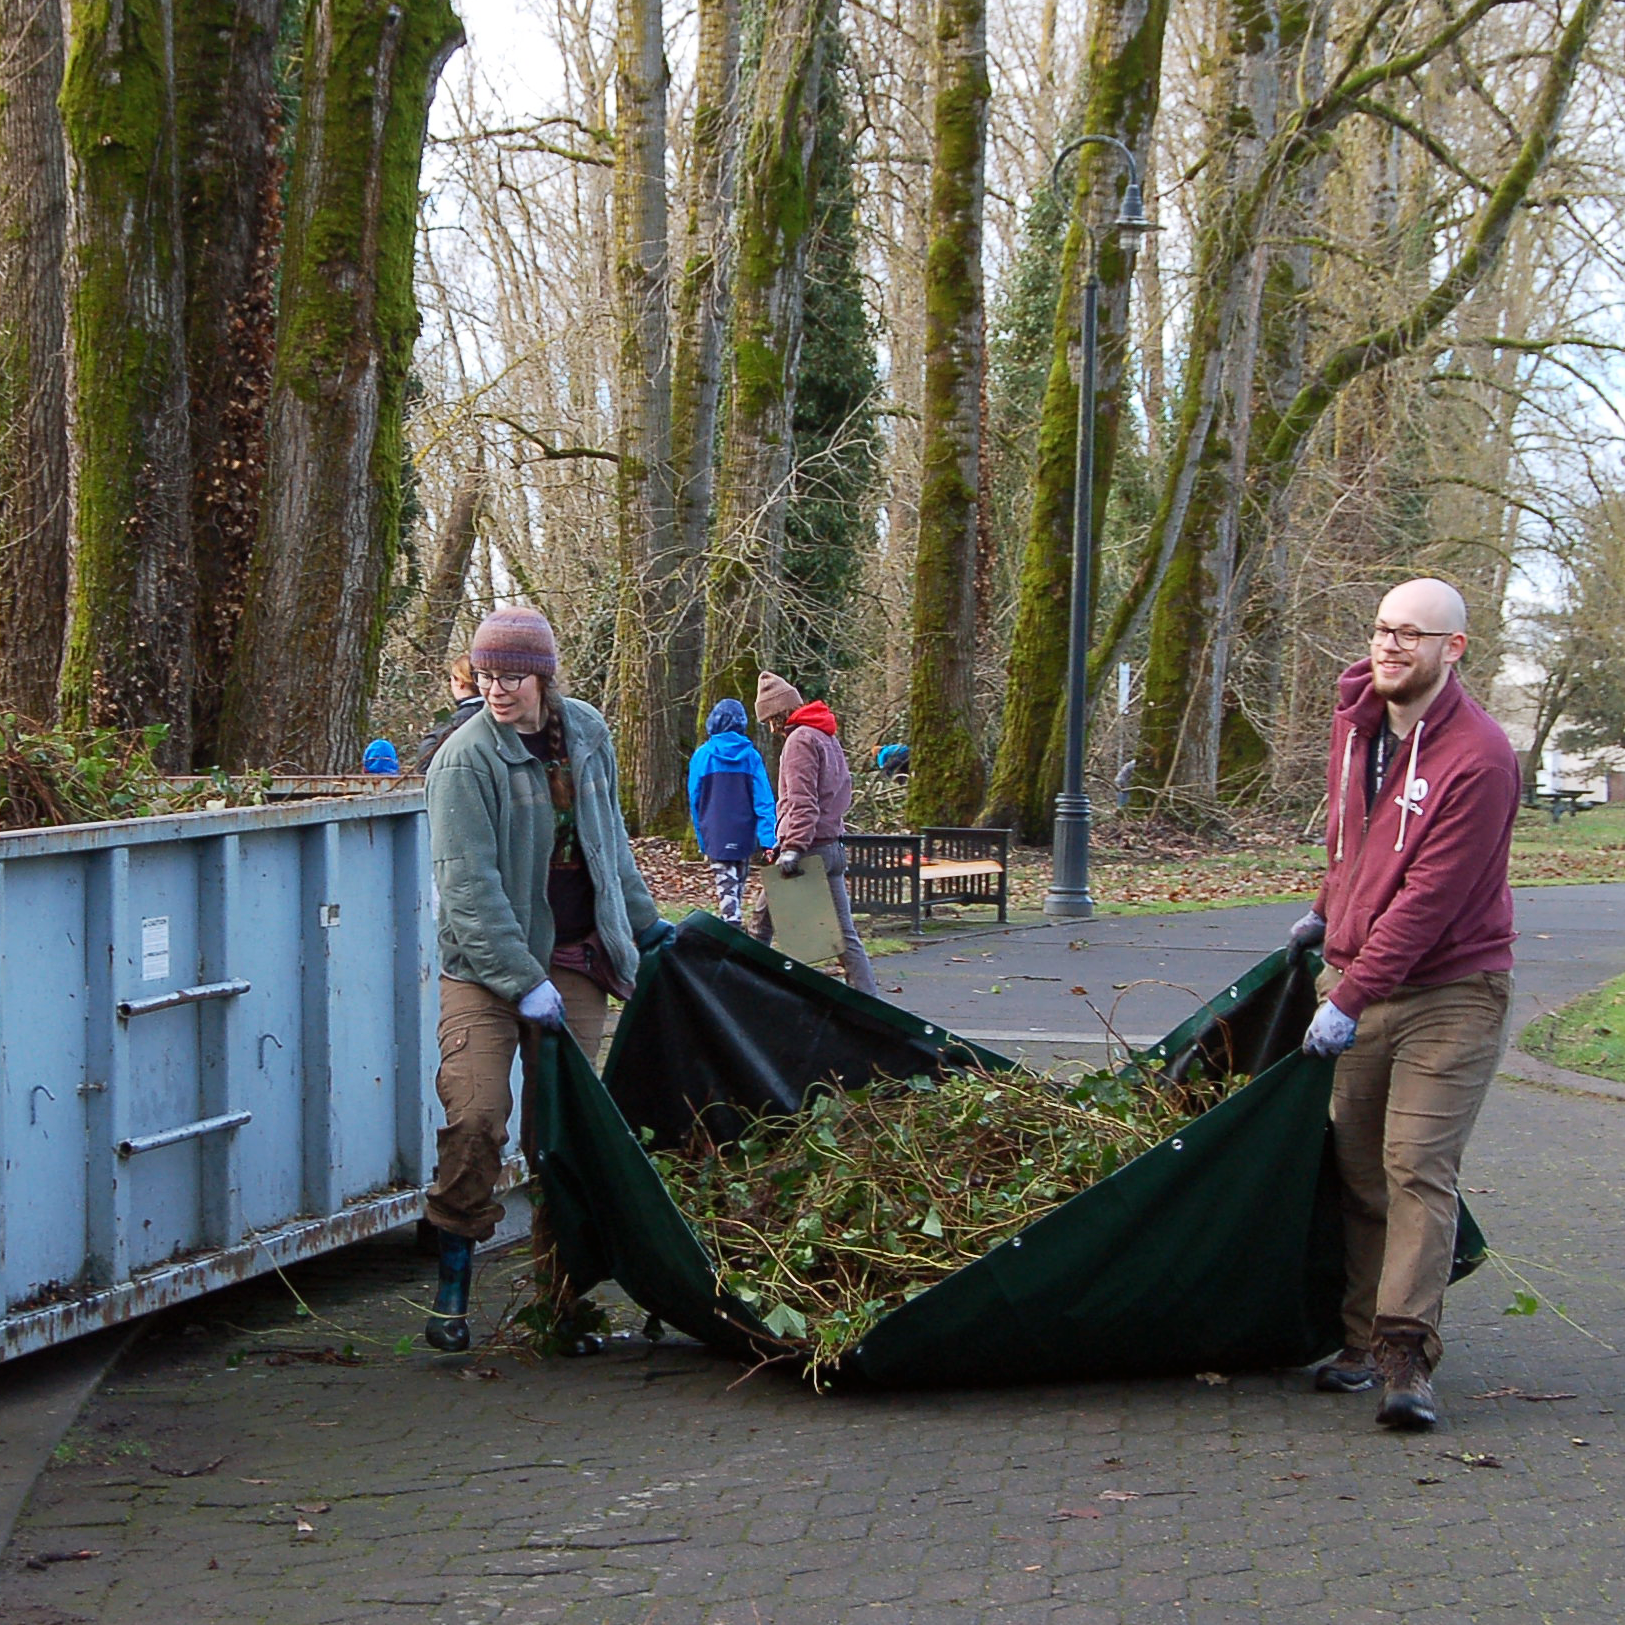 volunteers removing invasive ivy and put it in bin for proper disposal